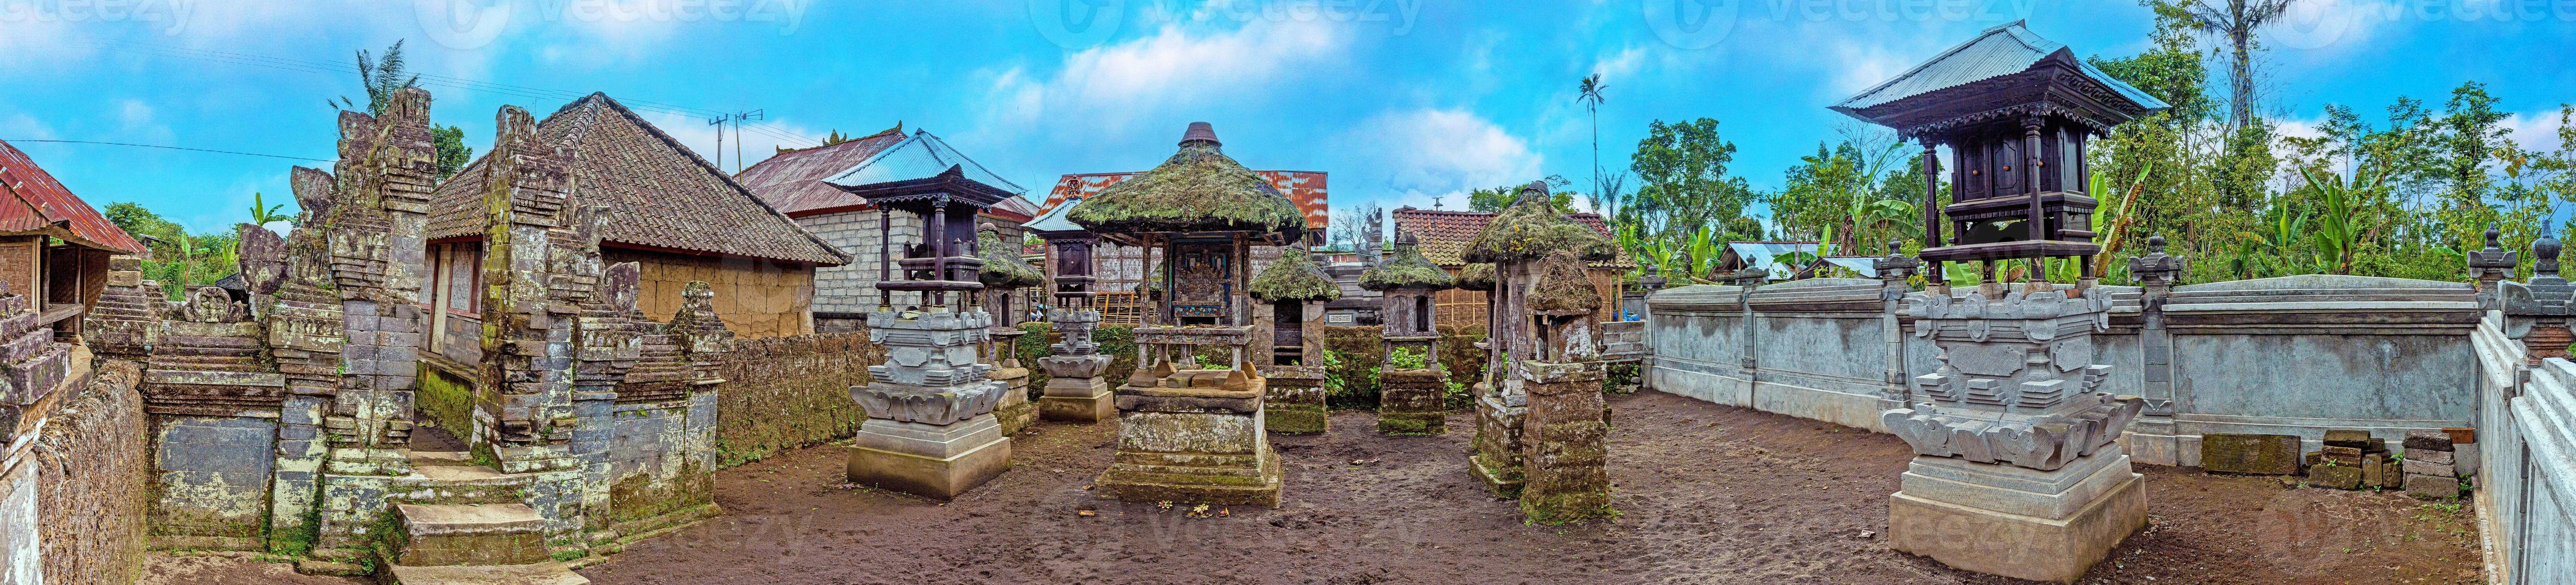 Panoramic view over a typical Hindu cemetery on the Indonesian island of Bali photo